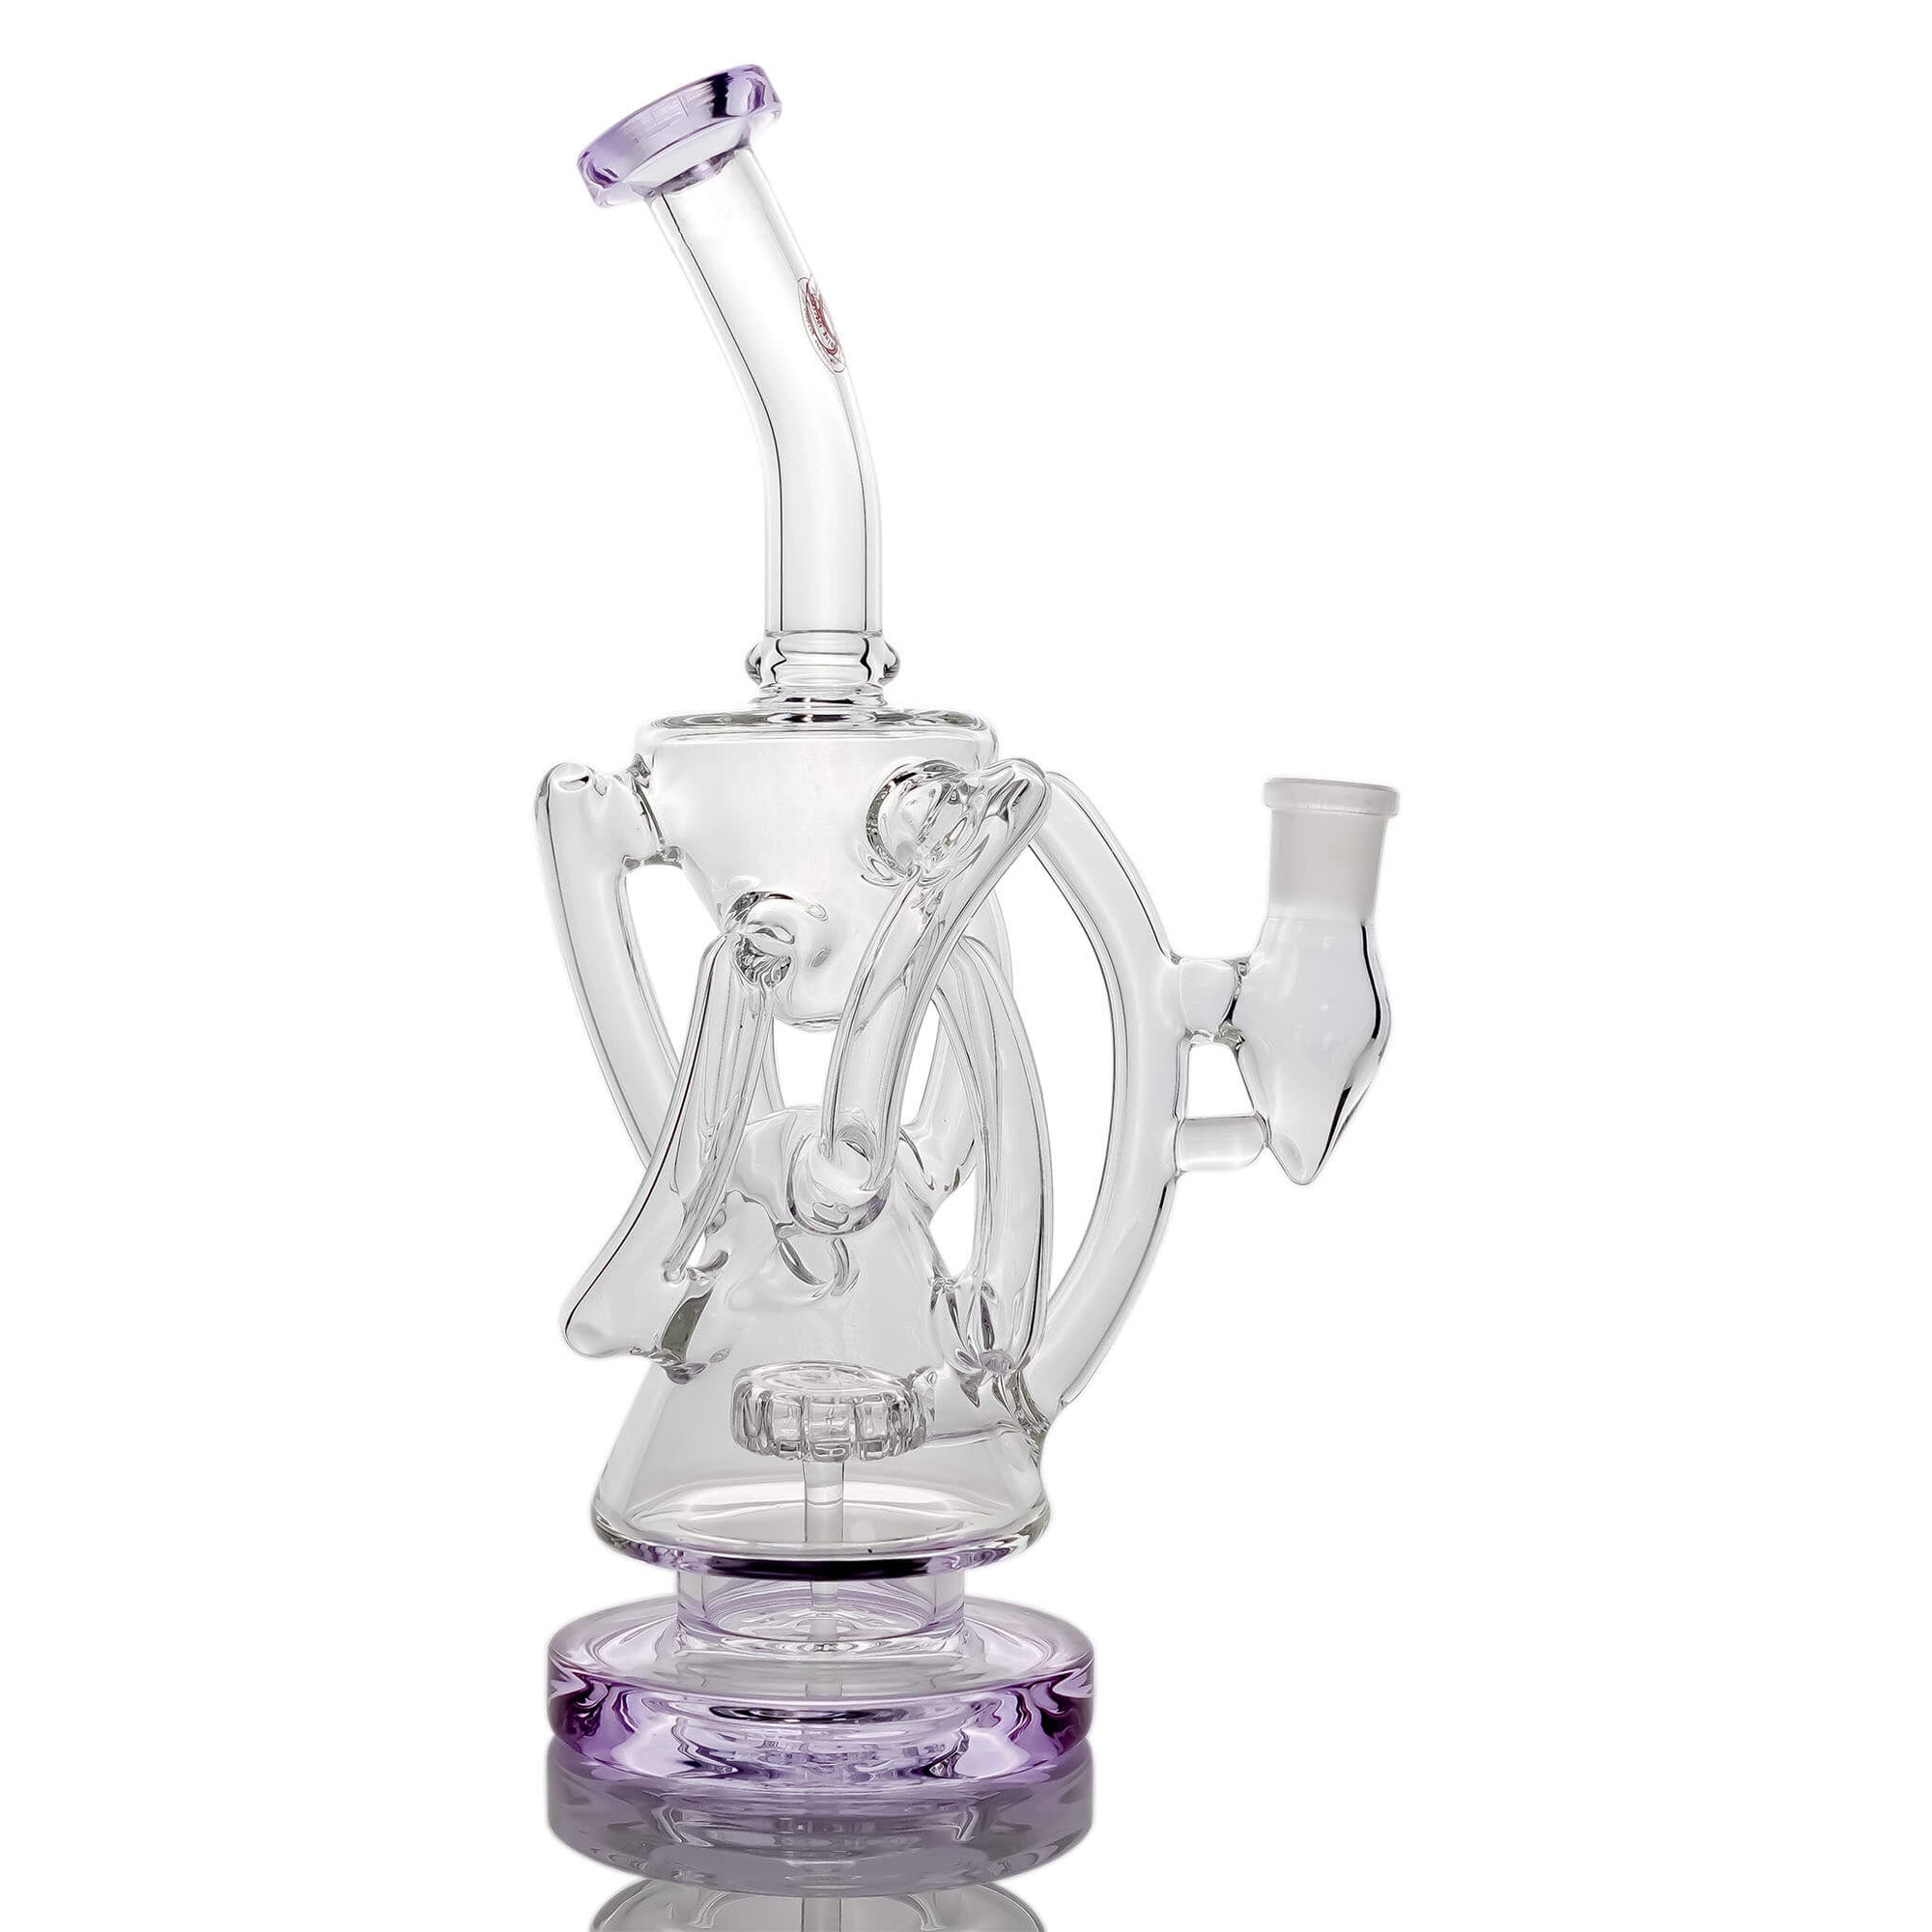 Trifecta Double Recycler Dab Rig | Purple Alternate Profile View | the dabbing specialists